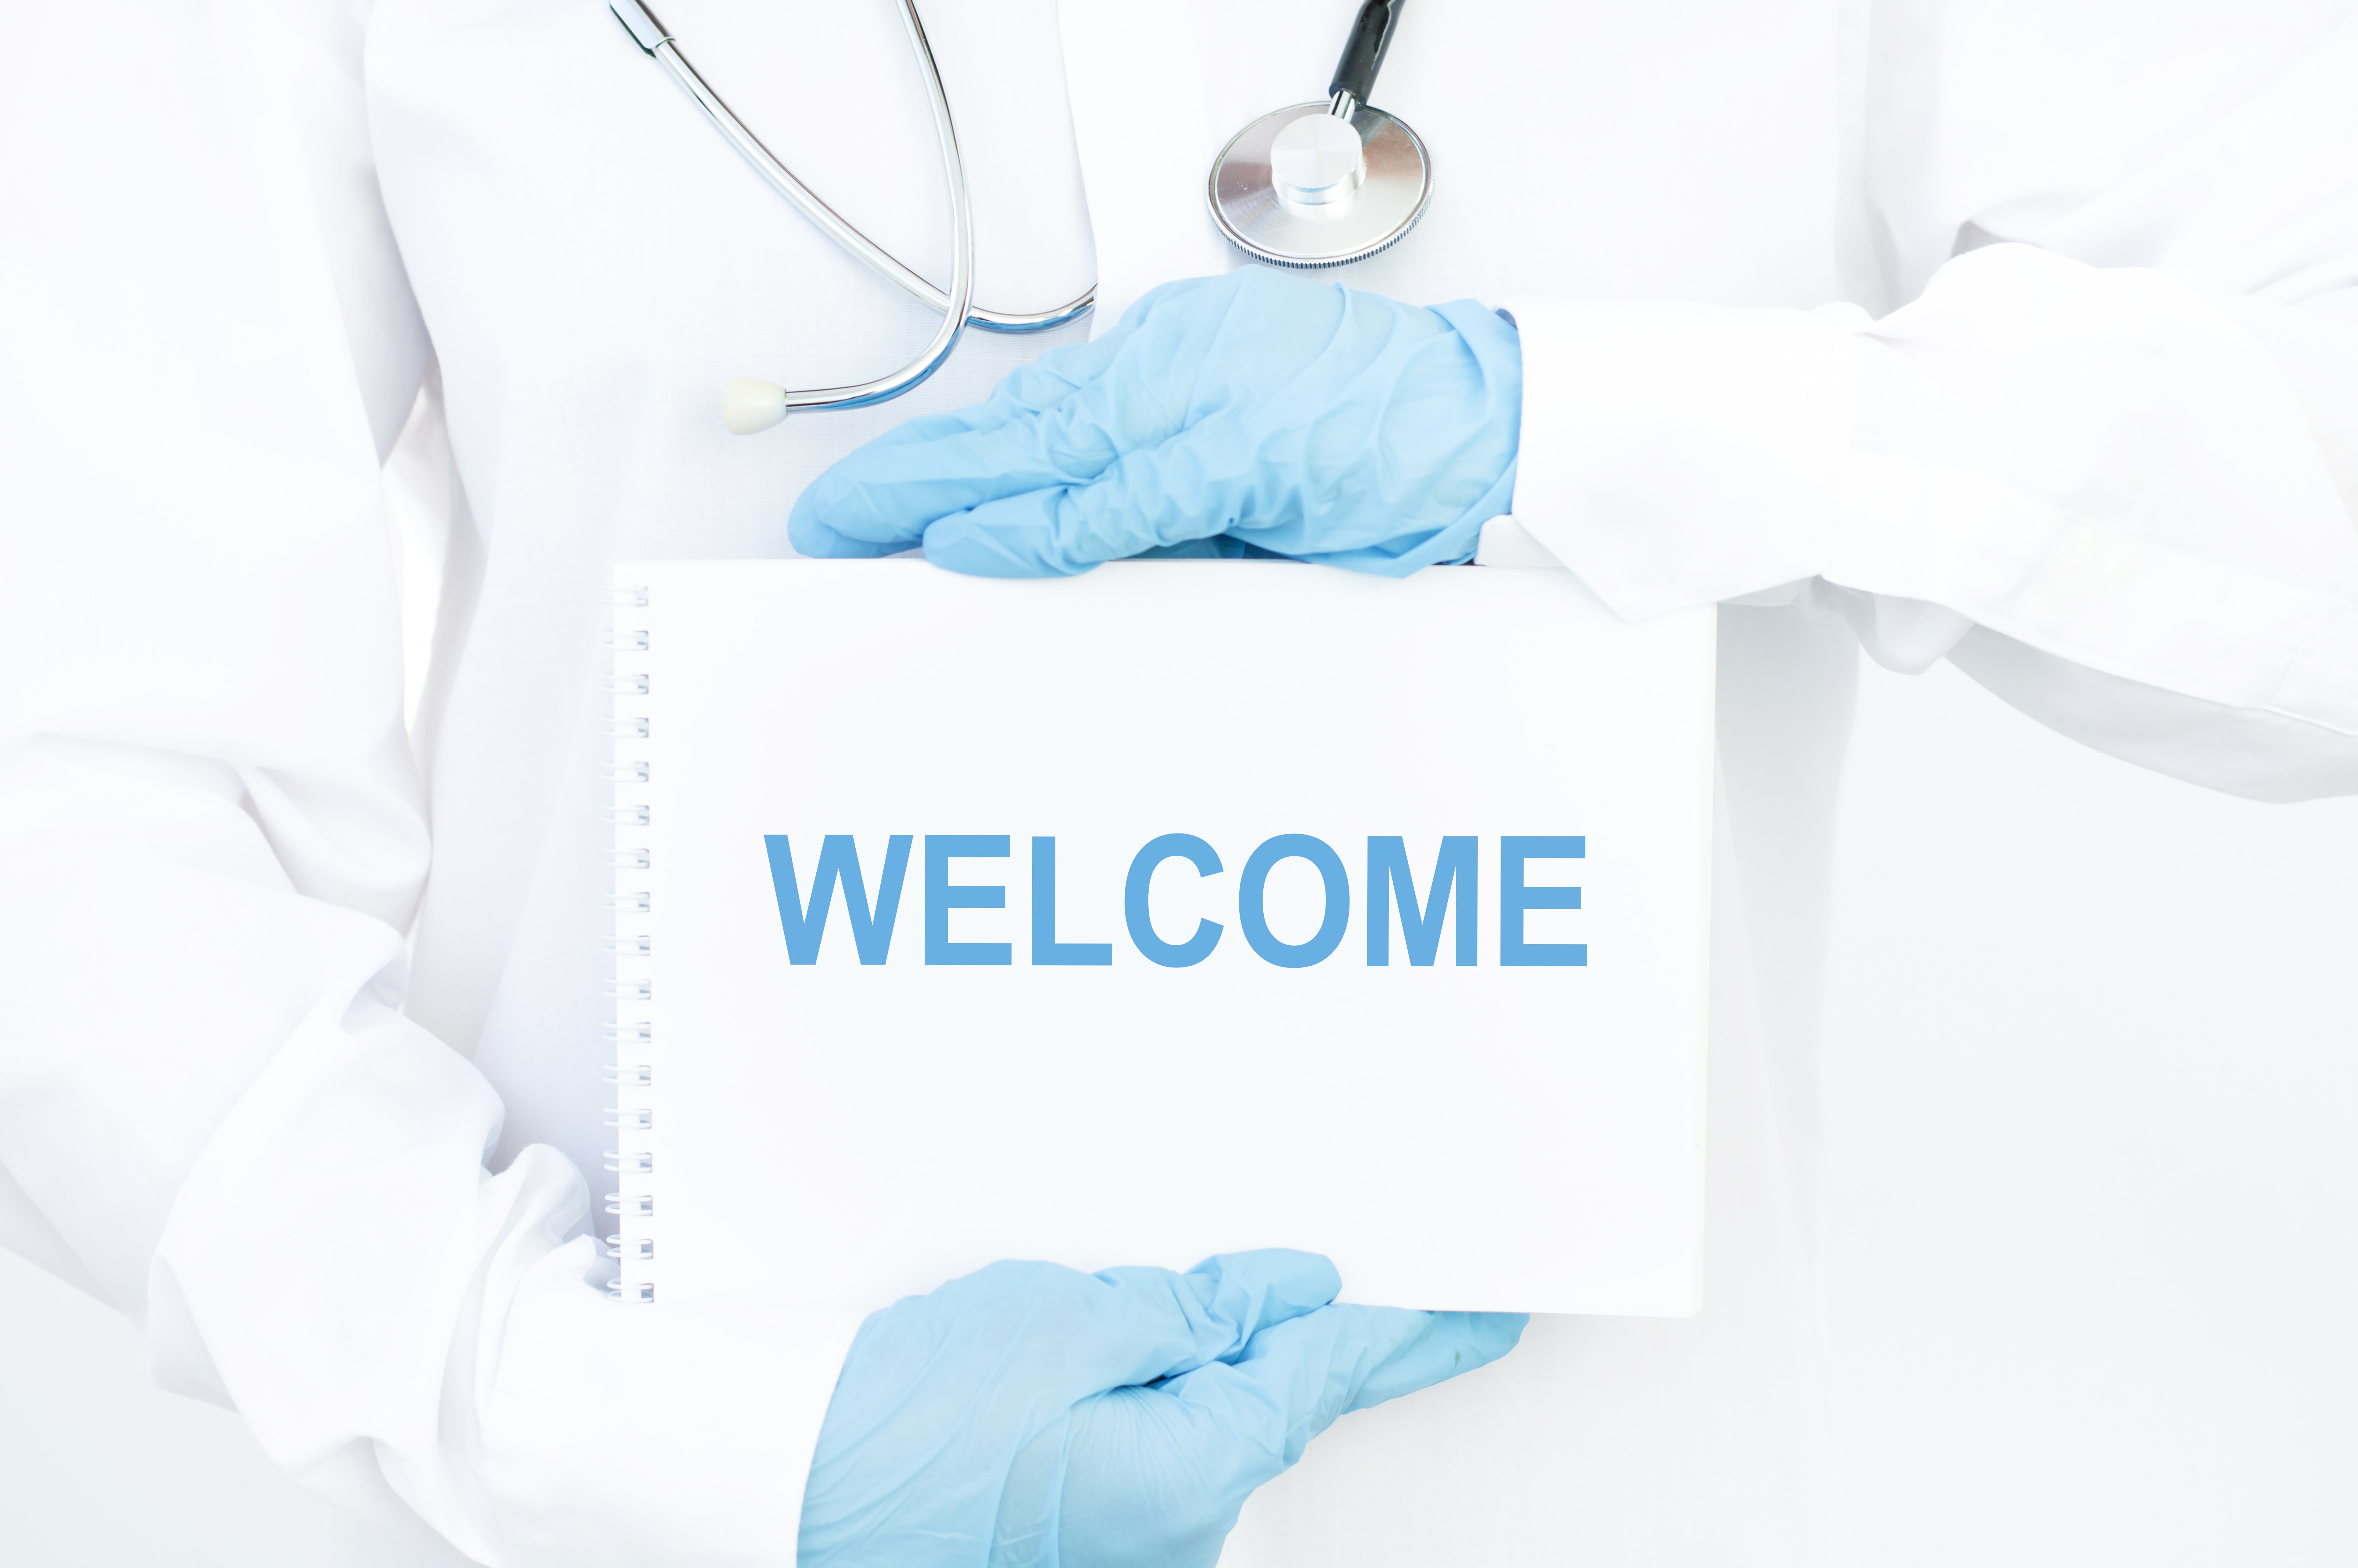 Doctor wearing white coat and blue gloves holding a "welcome" sign. | Photo: Shutterstock